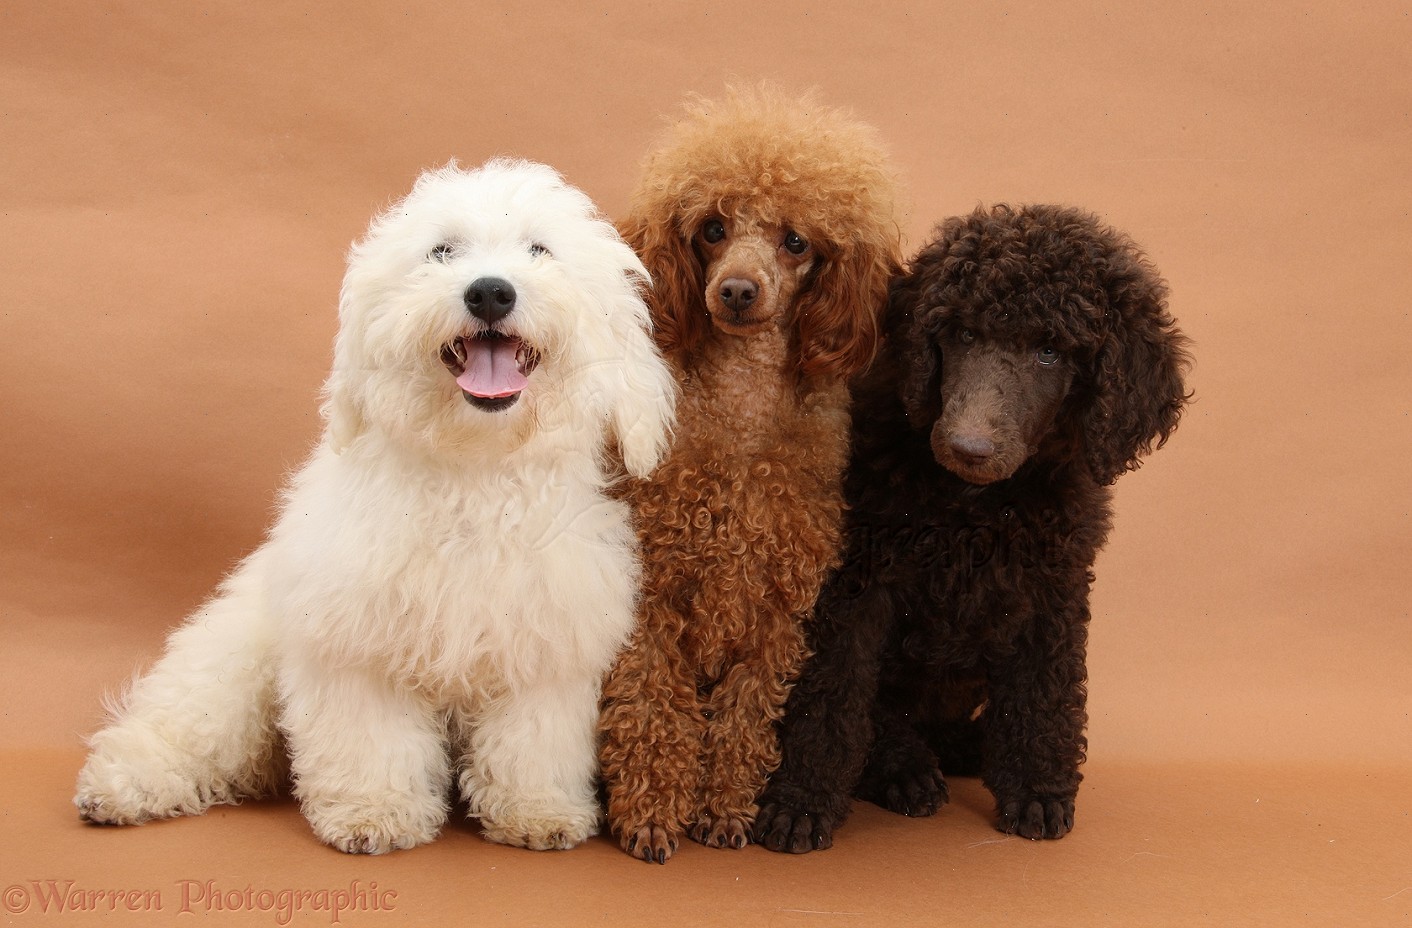 27439-Bichon-Standard-Poodle-pup-and-adult-toy-poodle.jpg